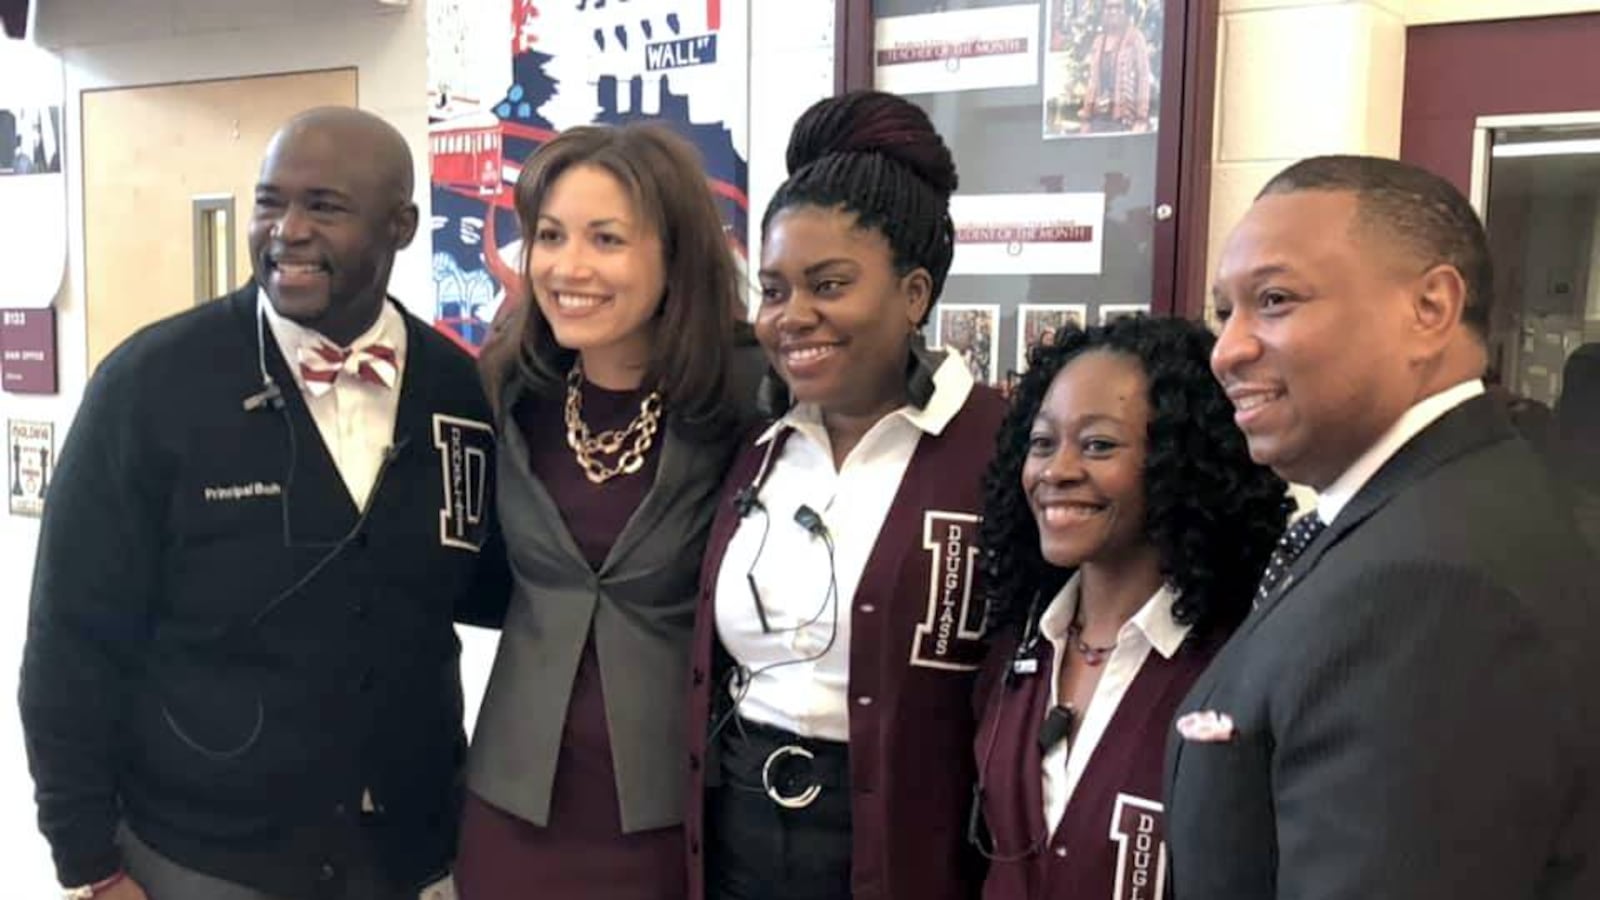 Tennessee's new education commissioner Penny Schwinn (second from left) met with Douglass High School students and Shelby County Schools leaders Friday.